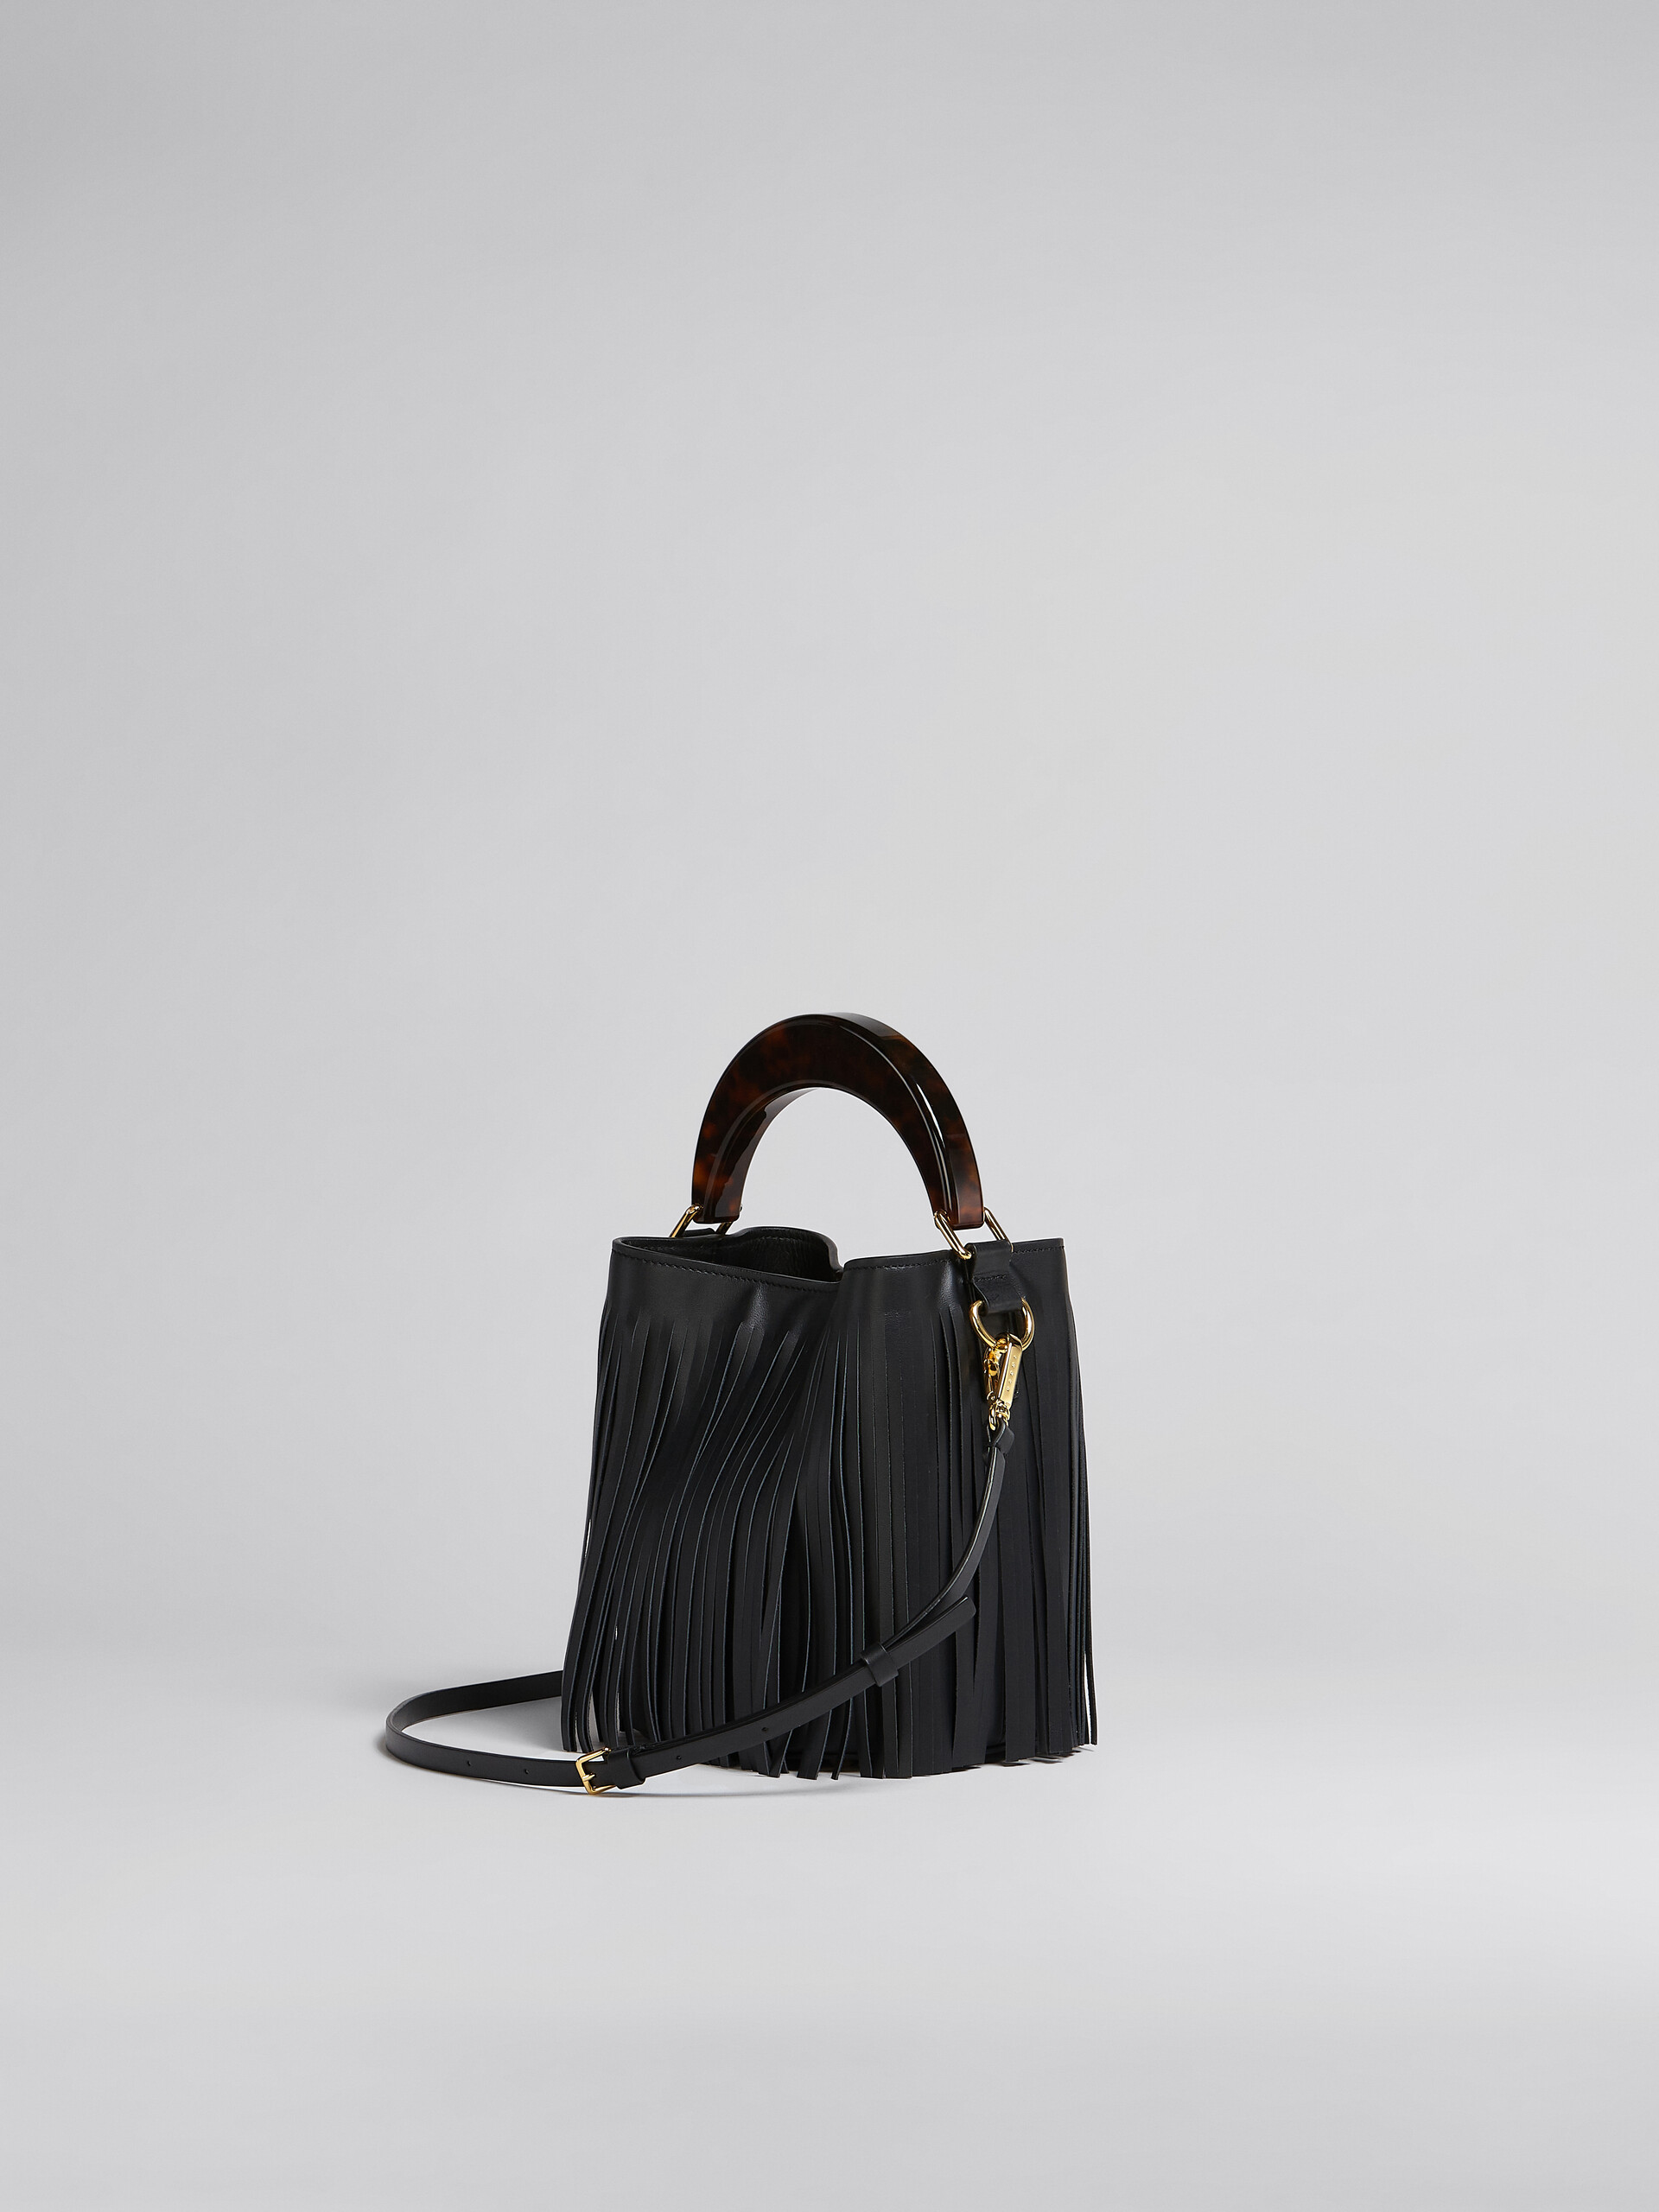 Venice Small Bucket in black leather with fringes - Shoulder Bag - Image 3